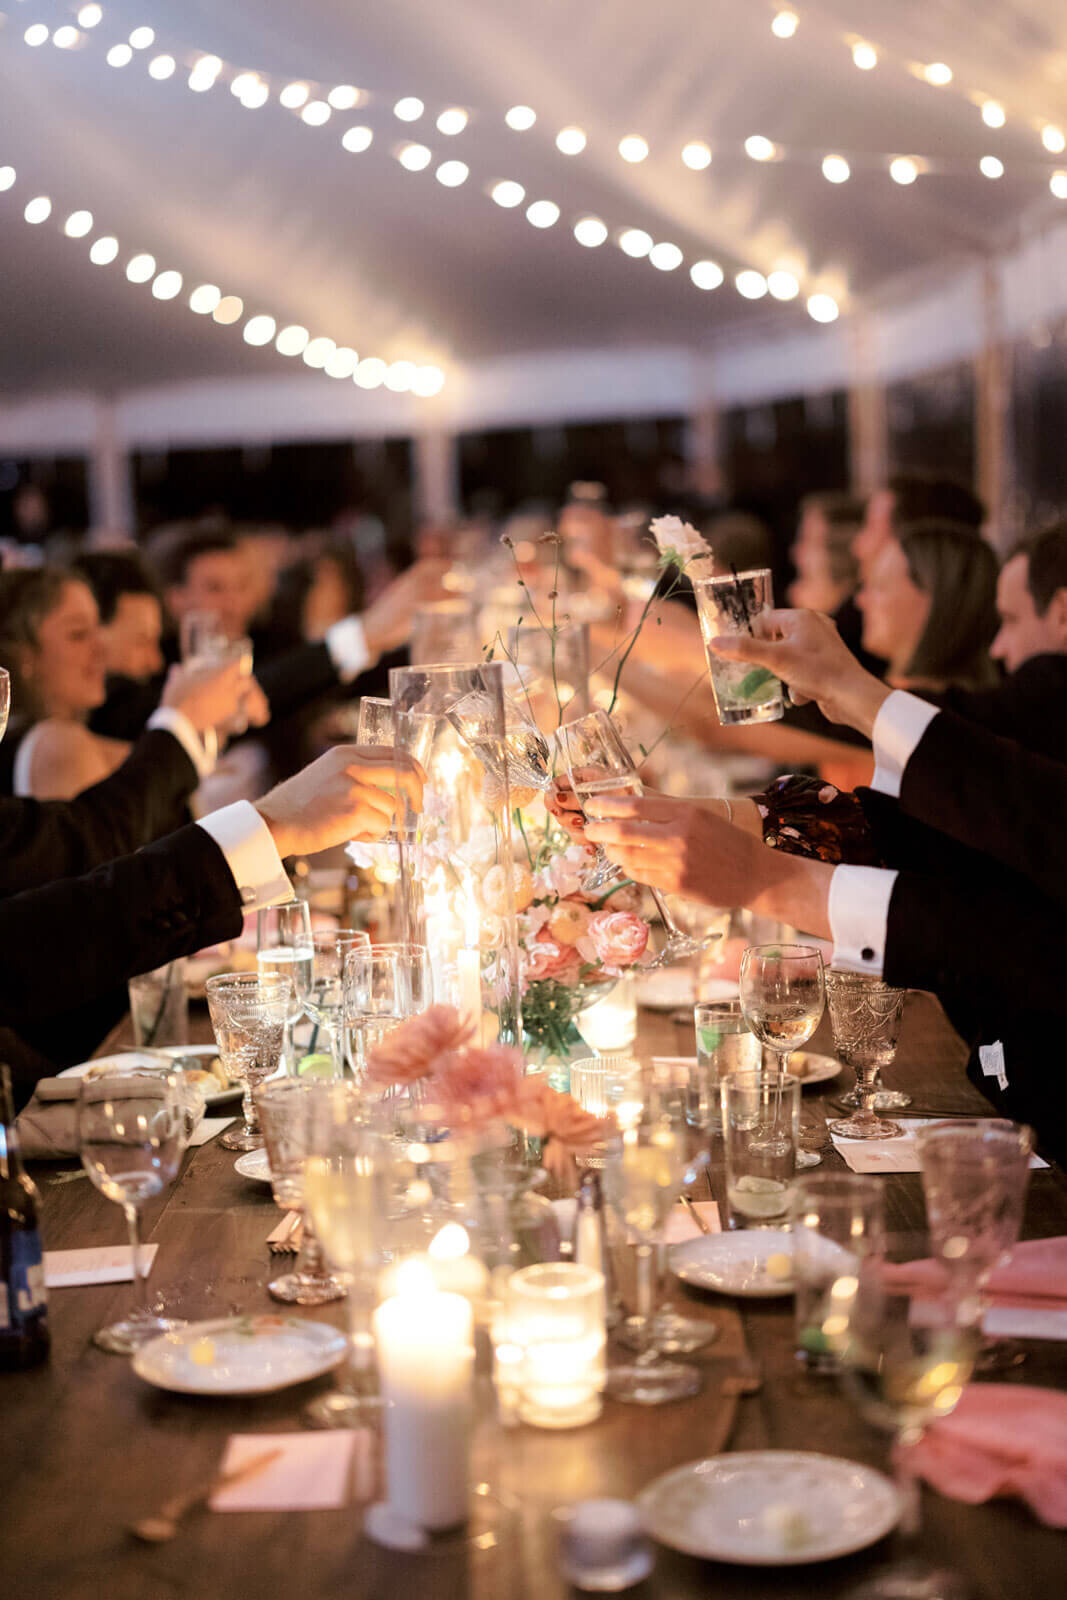 The wedding guests are doing a toast at the elegant wedding reception at The Ausable Club, NY. Image by Jenny Fu Studio